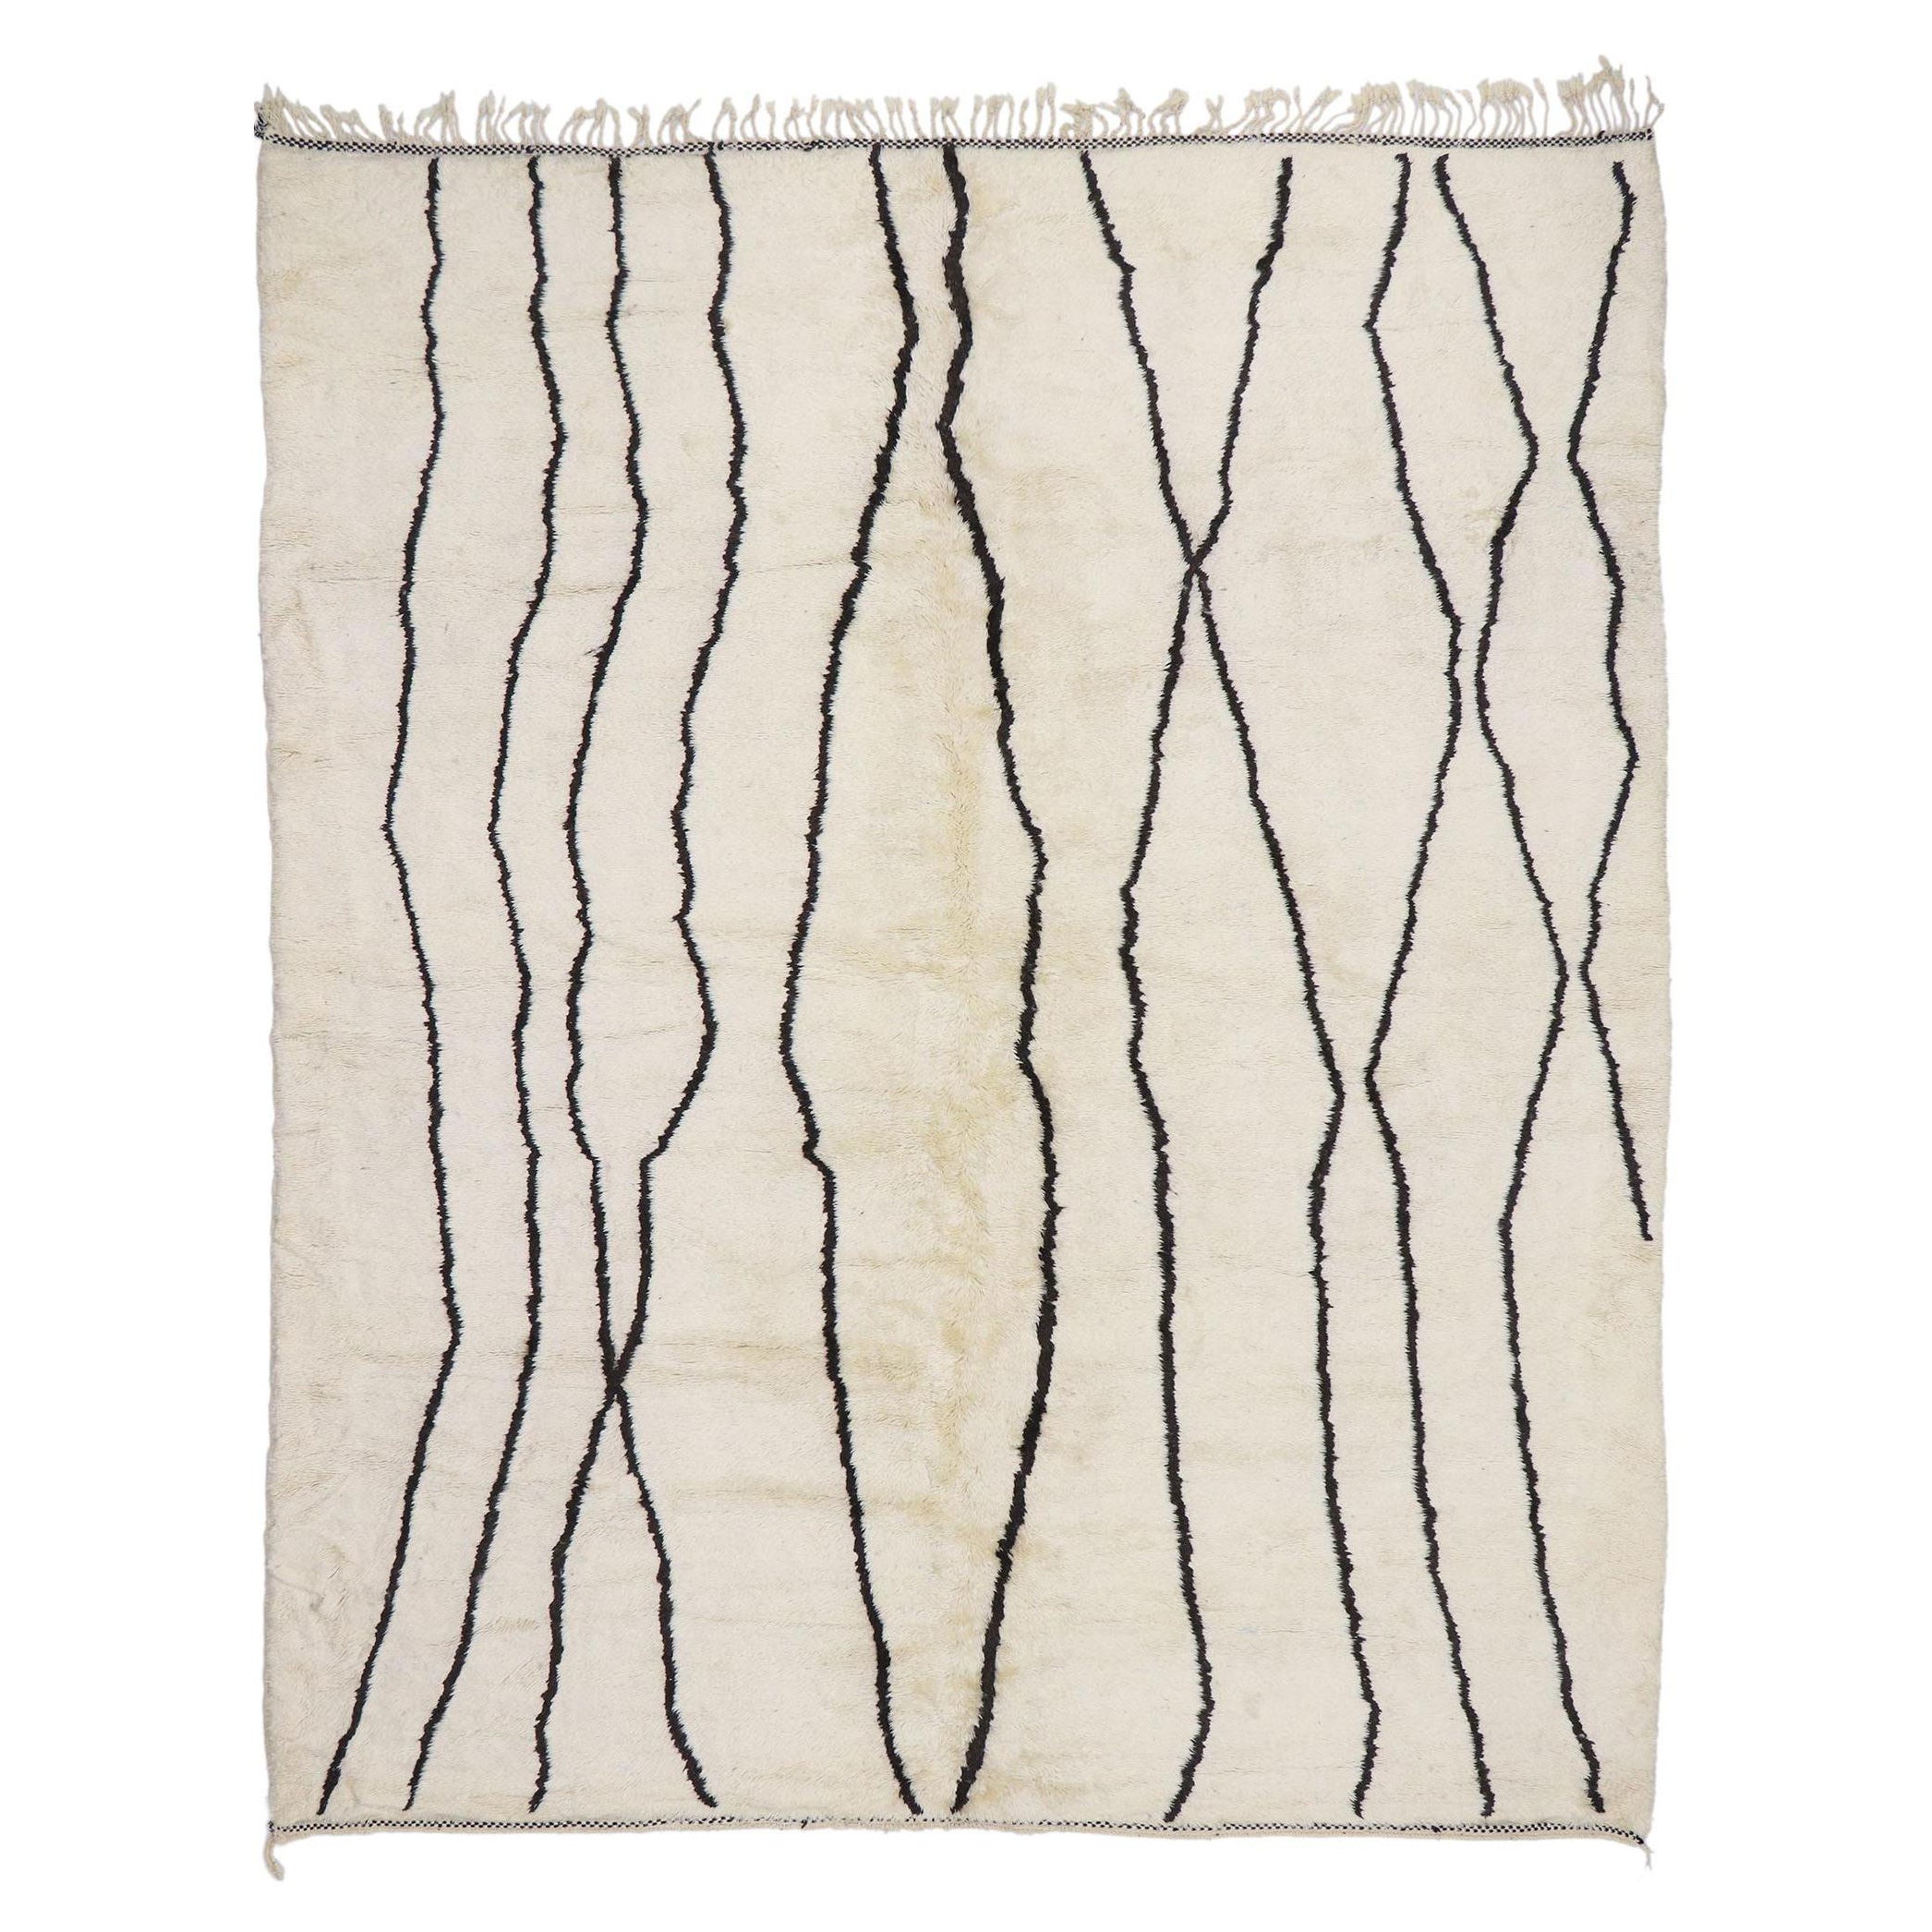 Authentic Berber Moroccan Rug, Nomadic Charm Meets Modern Luxe Style